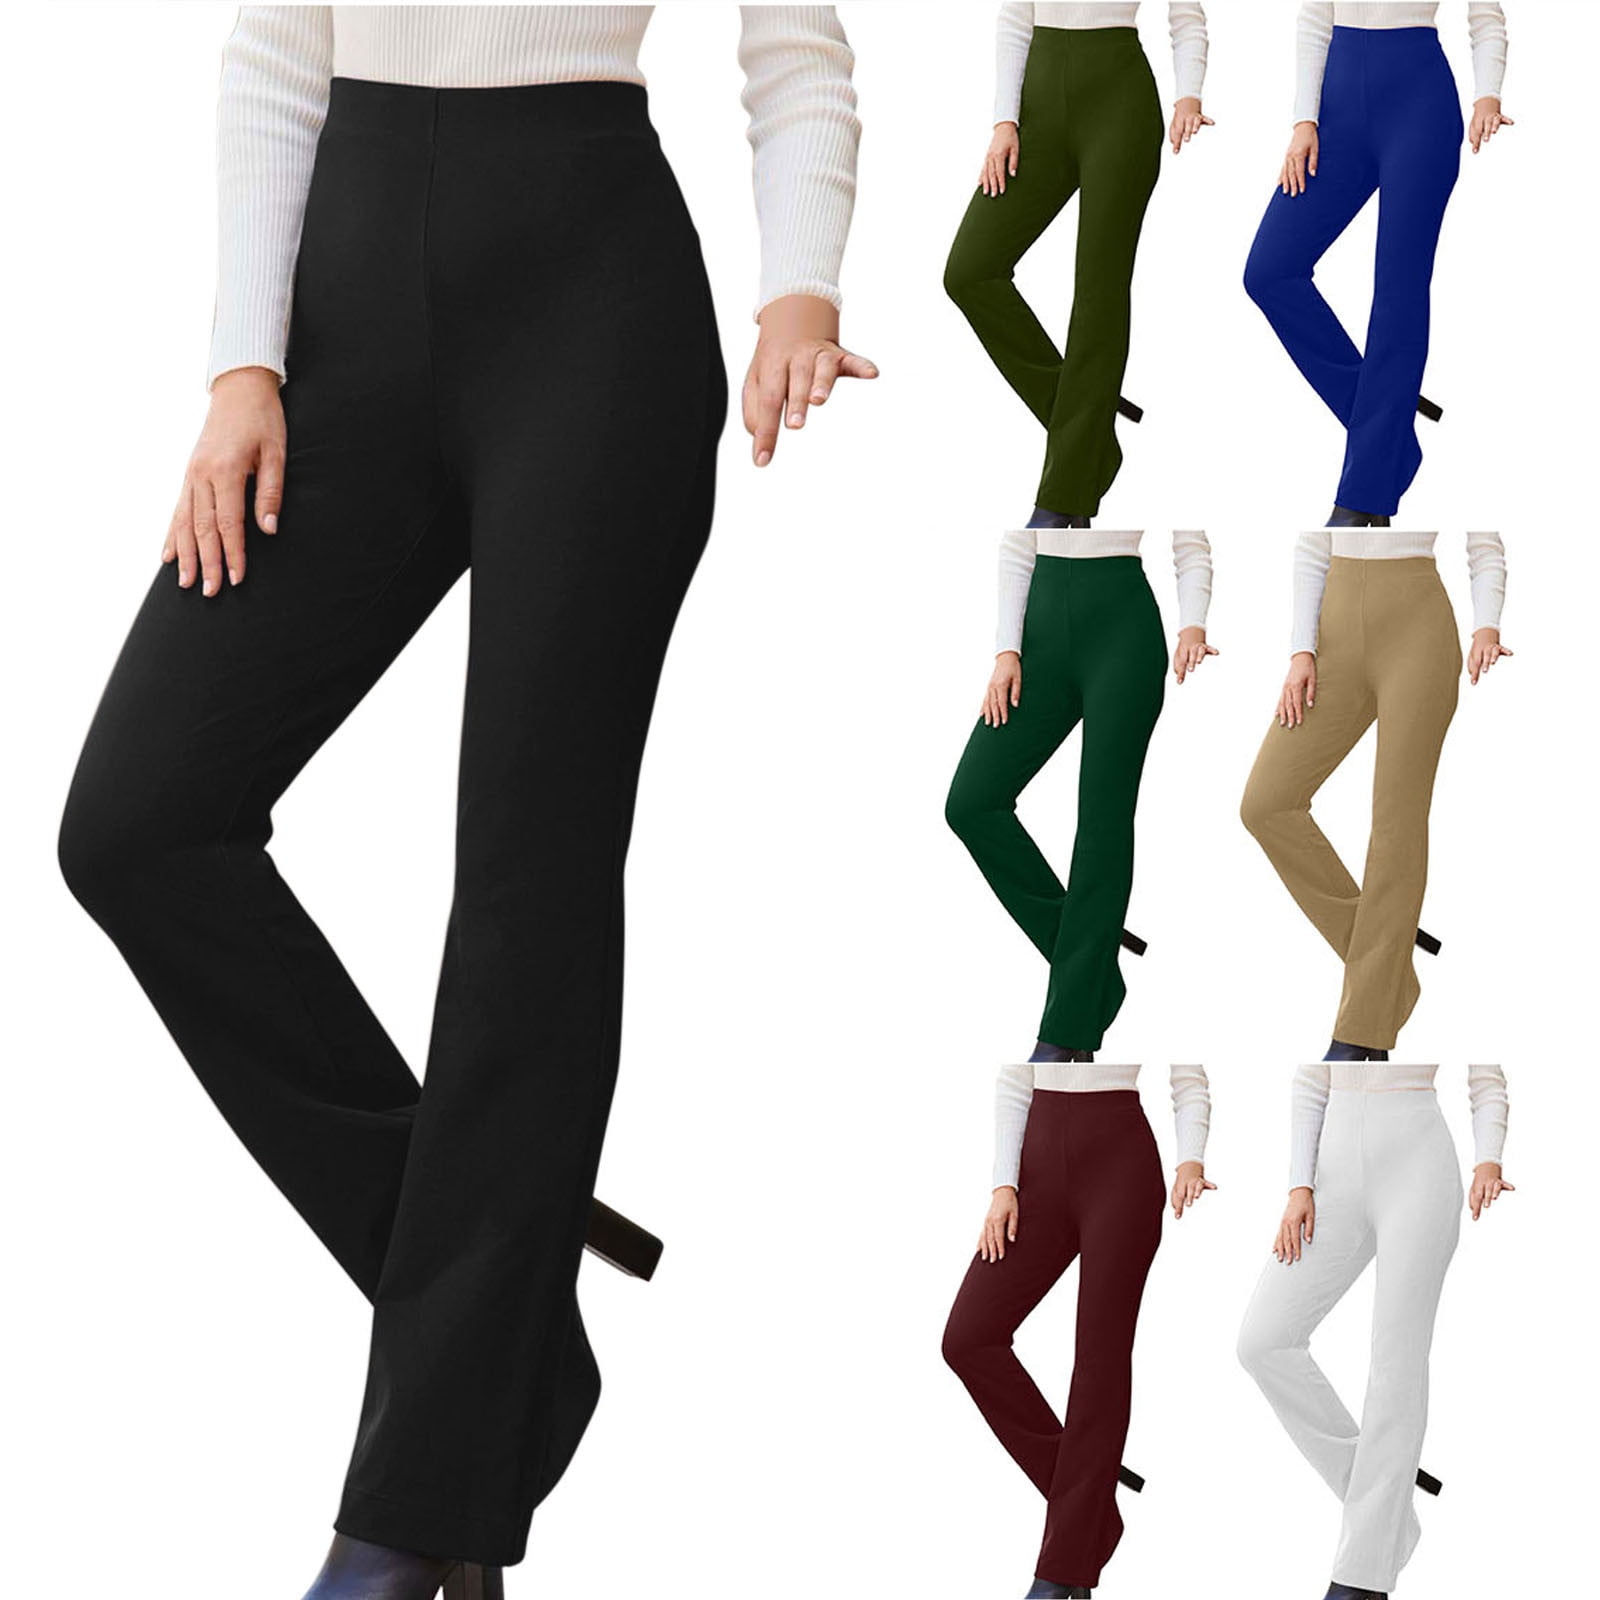 NESTVEST Women's Flare Solid Suit Pants,Leisure Trousers,Bell-bottoms ...